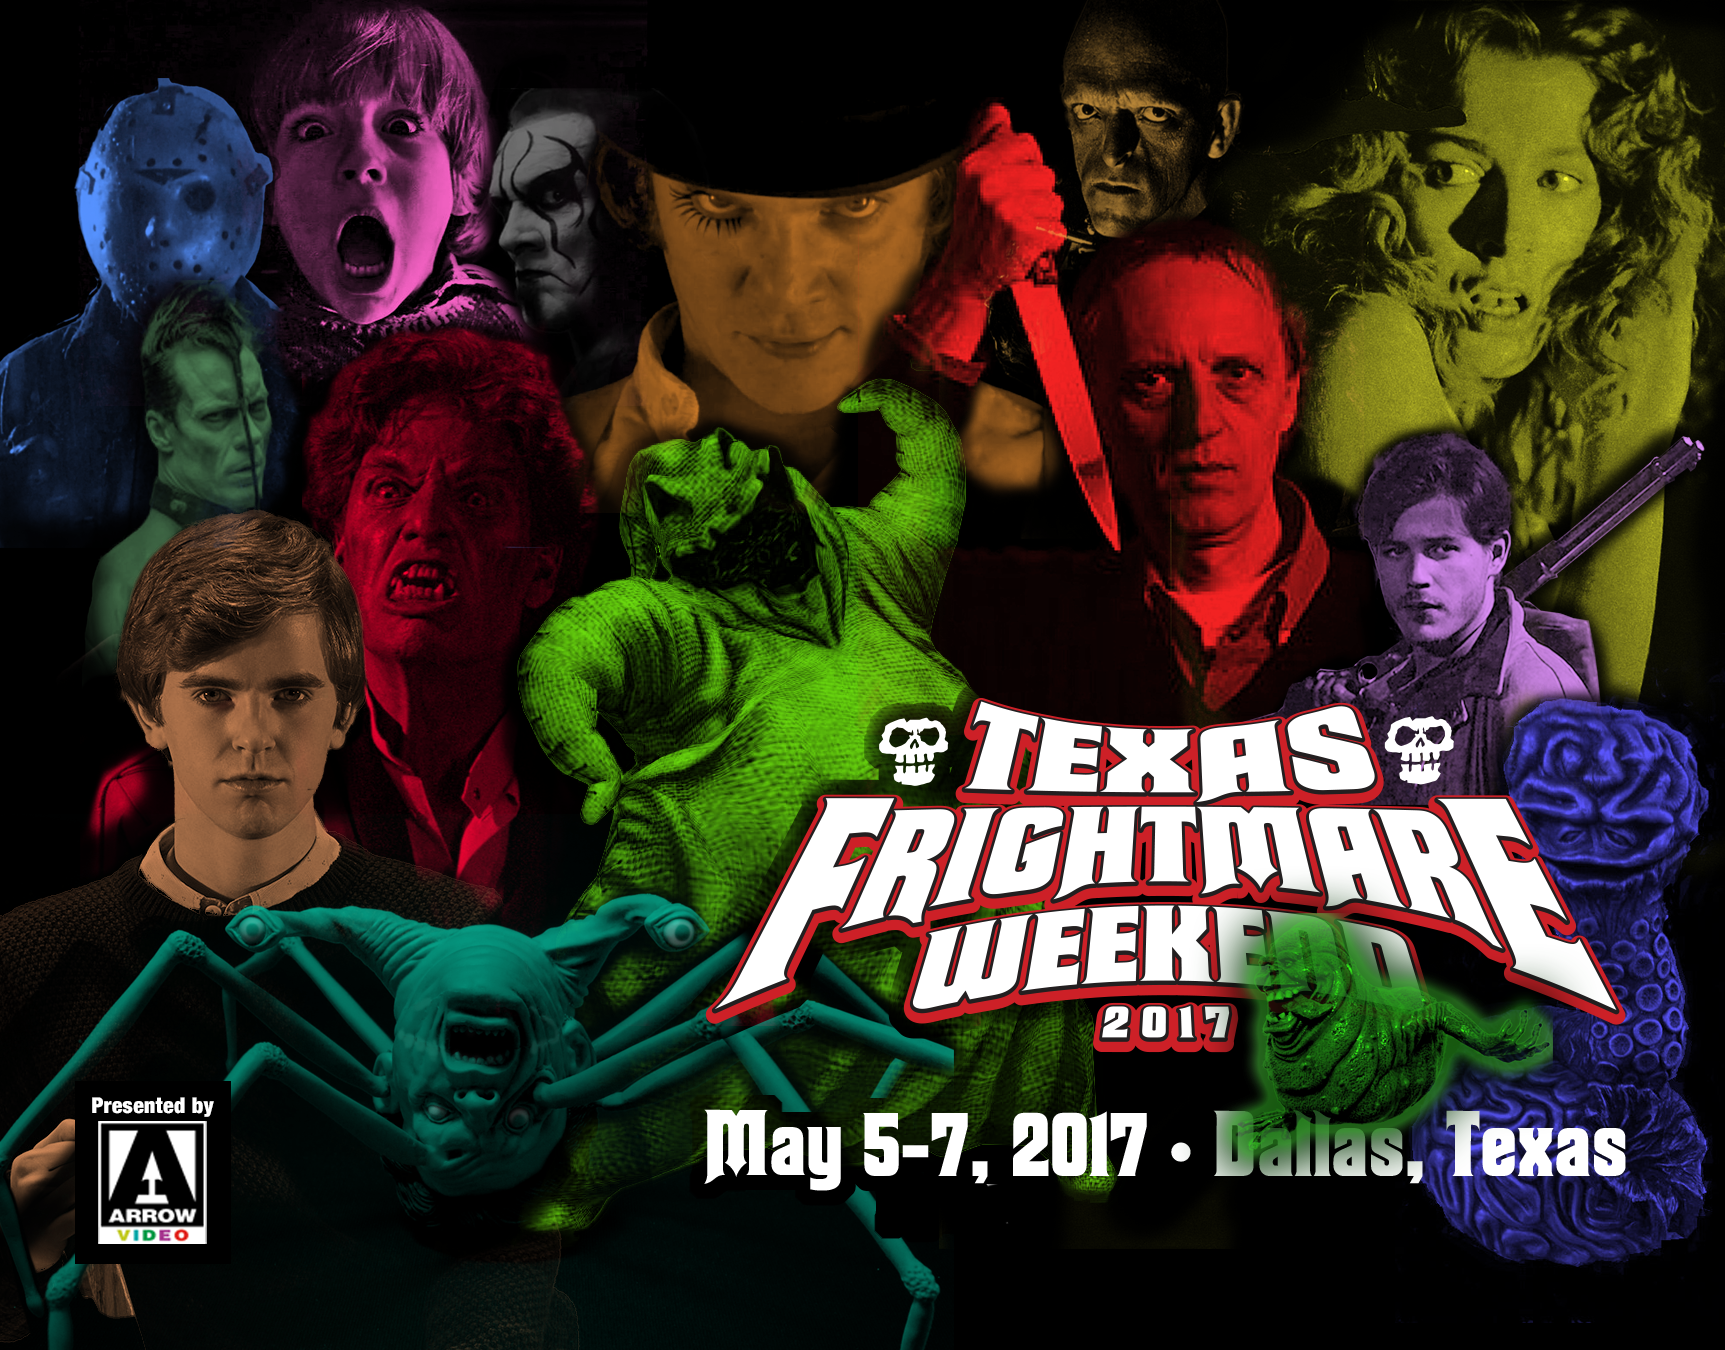 Texas Frightmare Weekend 2017 in about Two Weeks! Faygoluvers